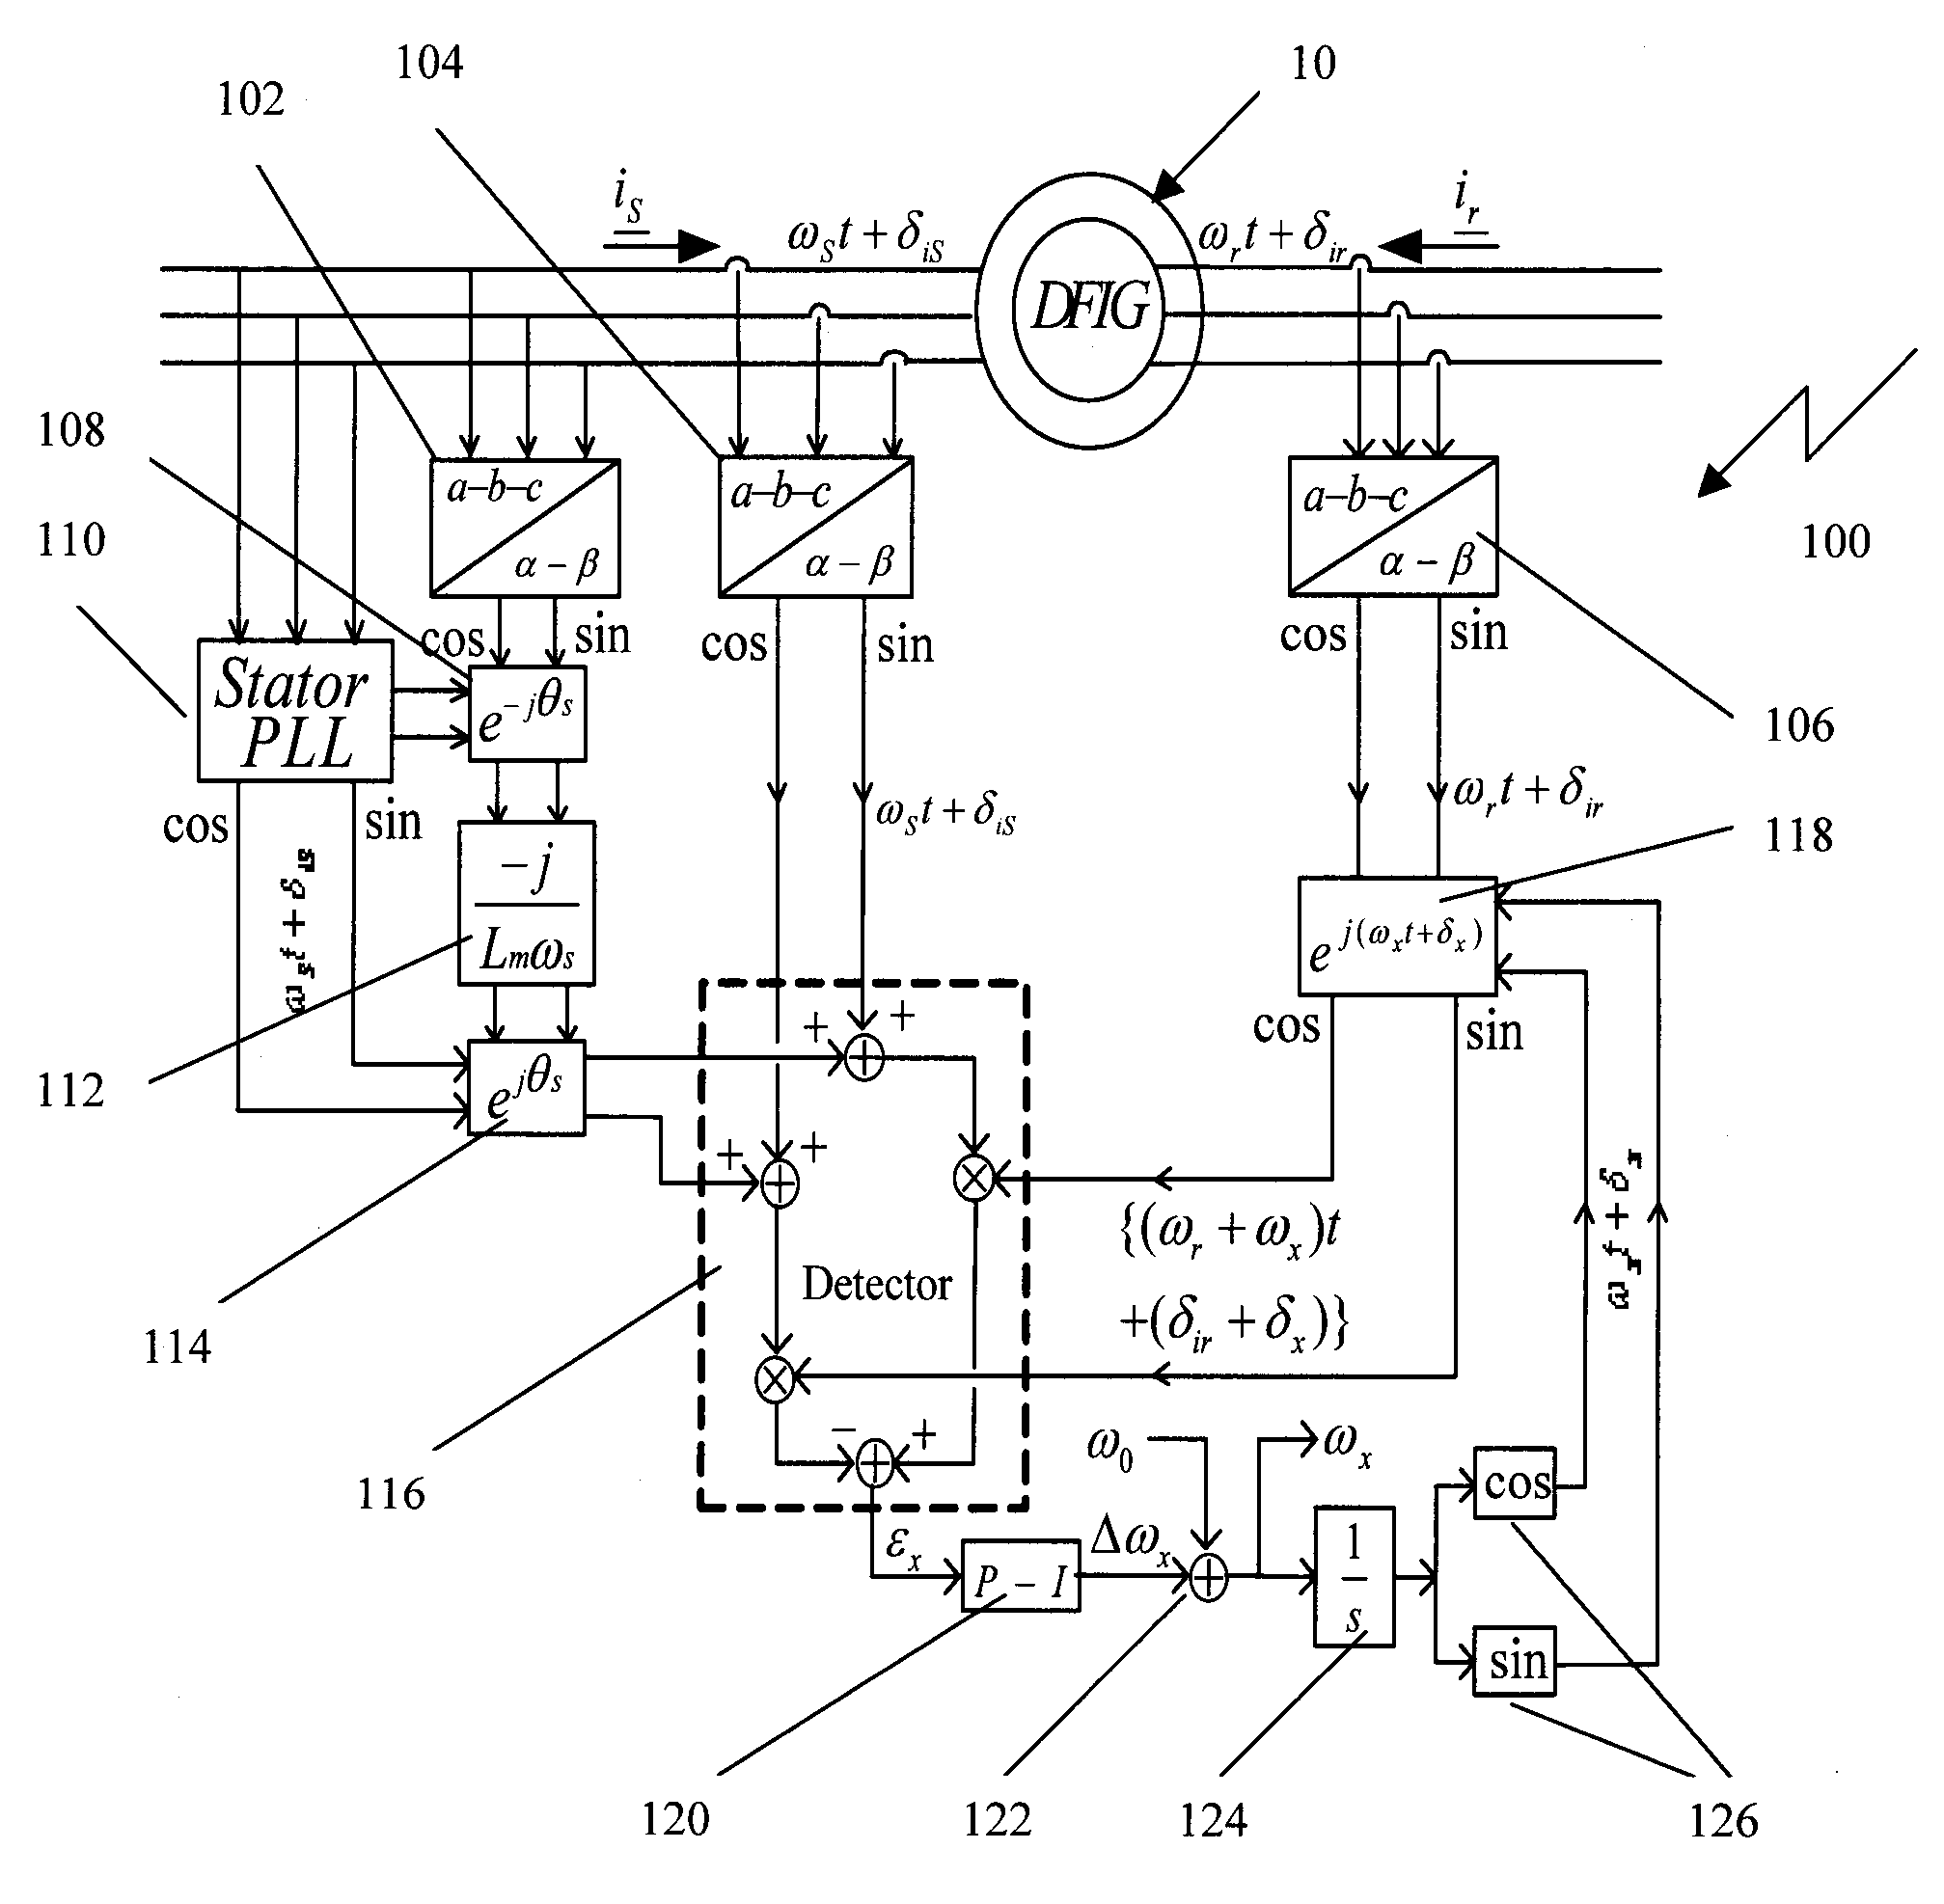 Method and system for controlling a doubly-fed induction machine